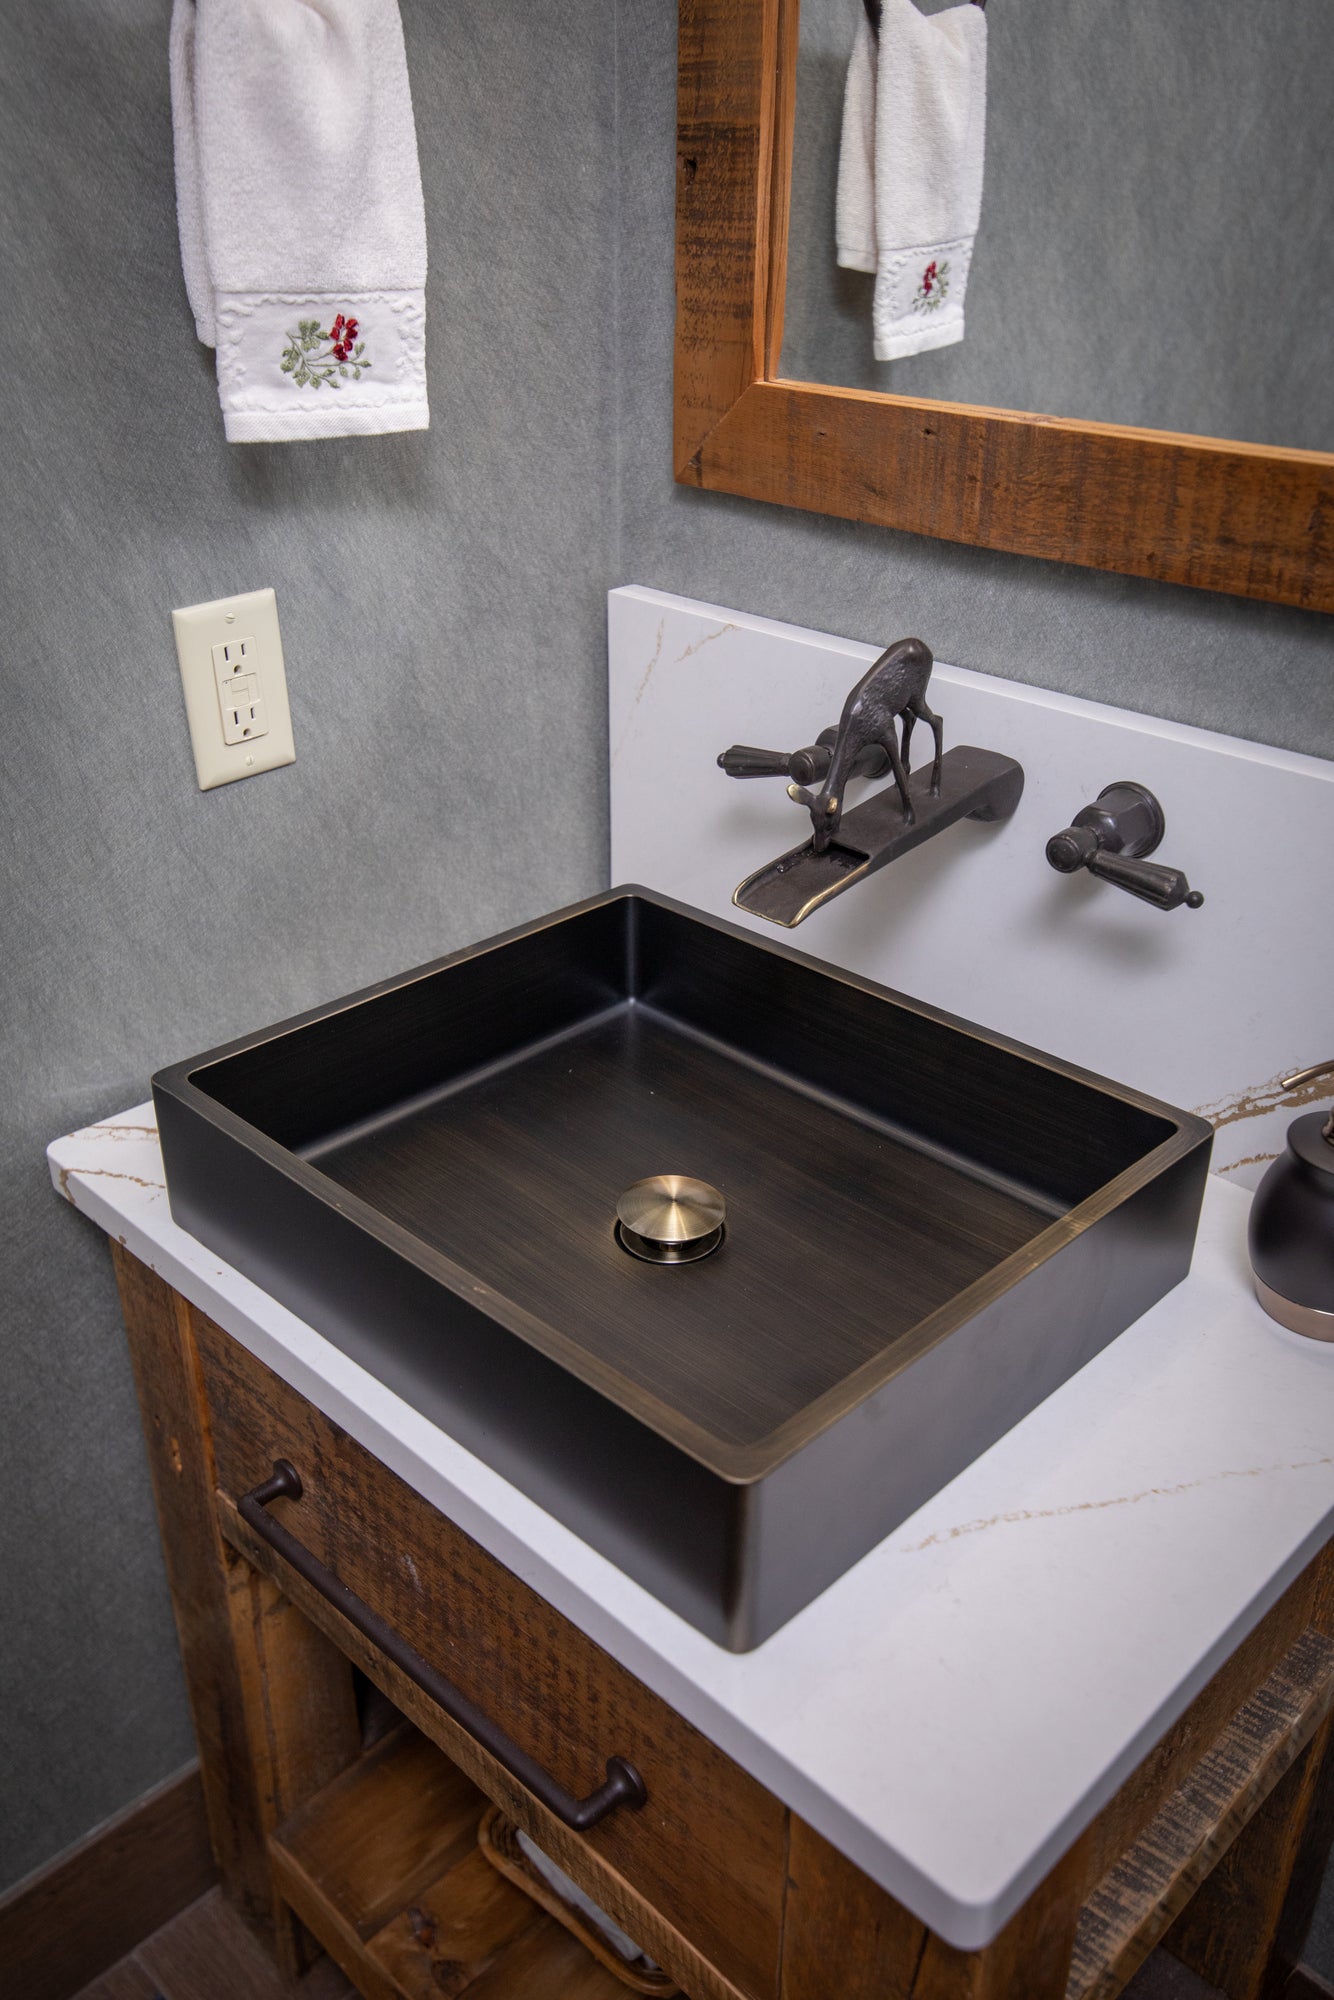 Rectangular 18 3/4" x 15 3/4" Thick Rim Stainless Steel Bathroom Vessel Sink with Drain in Antique Gold